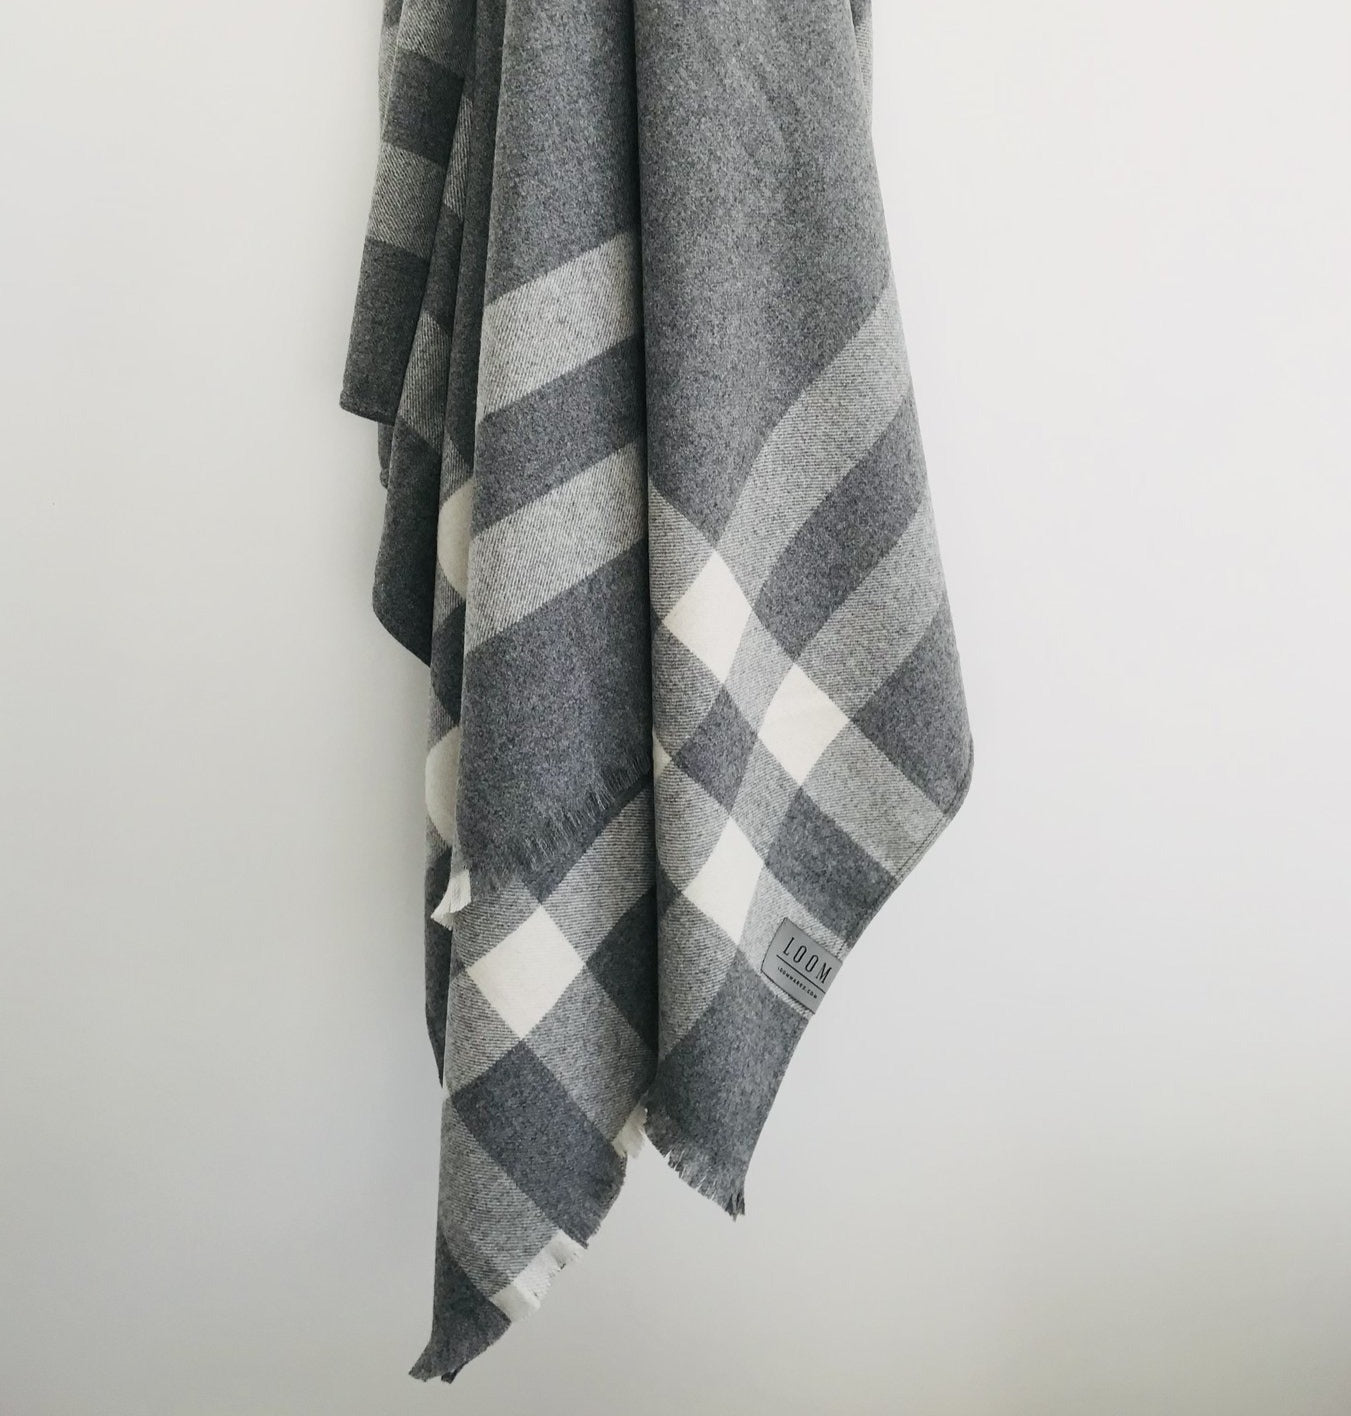 Cashmere Charcoal Merino Plaid Bed Blanket